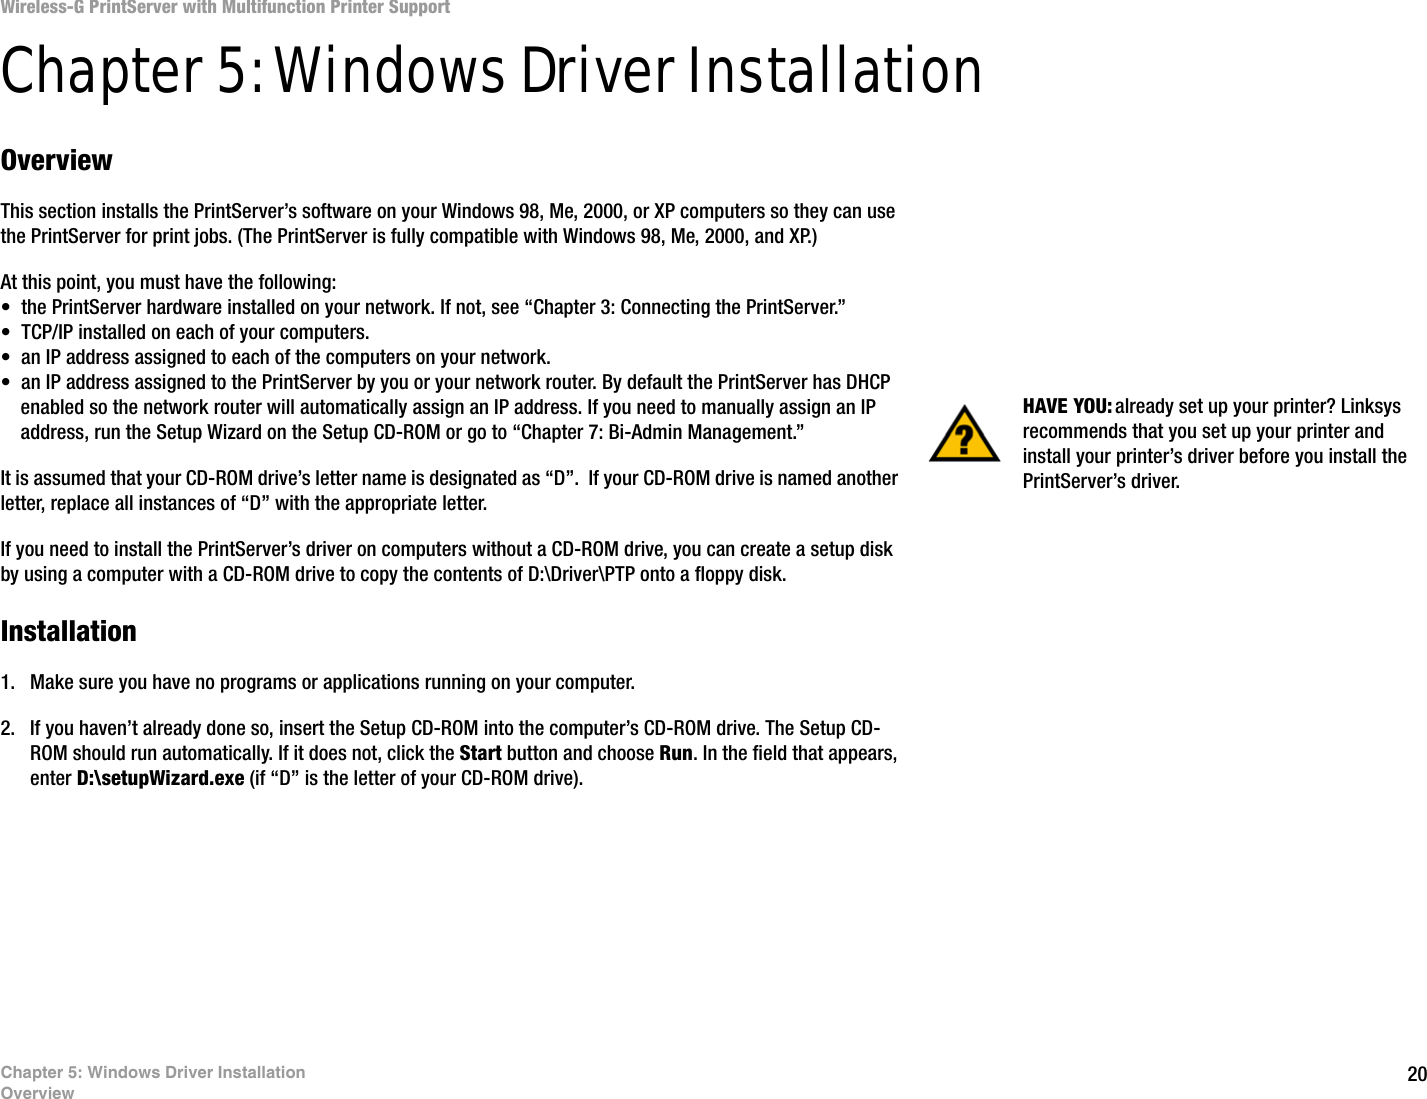 20Chapter 5: Windows Driver InstallationOverviewWireless-G PrintServer with Multifunction Printer SupportChapter 5: Windows Driver InstallationOverviewThis section installs the PrintServer’s software on your Windows 98, Me, 2000, or XP computers so they can use the PrintServer for print jobs. (The PrintServer is fully compatible with Windows 98, Me, 2000, and XP.)At this point, you must have the following: • the PrintServer hardware installed on your network. If not, see “Chapter 3: Connecting the PrintServer.”• TCP/IP installed on each of your computers. • an IP address assigned to each of the computers on your network.• an IP address assigned to the PrintServer by you or your network router. By default the PrintServer has DHCP enabled so the network router will automatically assign an IP address. If you need to manually assign an IP address, run the Setup Wizard on the Setup CD-ROM or go to “Chapter 7: Bi-Admin Management.”It is assumed that your CD-ROM drive’s letter name is designated as “D”.  If your CD-ROM drive is named another letter, replace all instances of “D” with the appropriate letter.If you need to install the PrintServer’s driver on computers without a CD-ROM drive, you can create a setup disk by using a computer with a CD-ROM drive to copy the contents of D:\Driver\PTP onto a floppy disk. Installation1. Make sure you have no programs or applications running on your computer.2. If you haven’t already done so, insert the Setup CD-ROM into the computer’s CD-ROM drive. The Setup CD-ROM should run automatically. If it does not, click the Start button and choose Run. In the field that appears, enter D:\setupWizard.exe (if “D” is the letter of your CD-ROM drive).HAVE YOU: already set up your printer? Linksys recommends that you set up your printer and install your printer’s driver before you install the PrintServer’s driver.